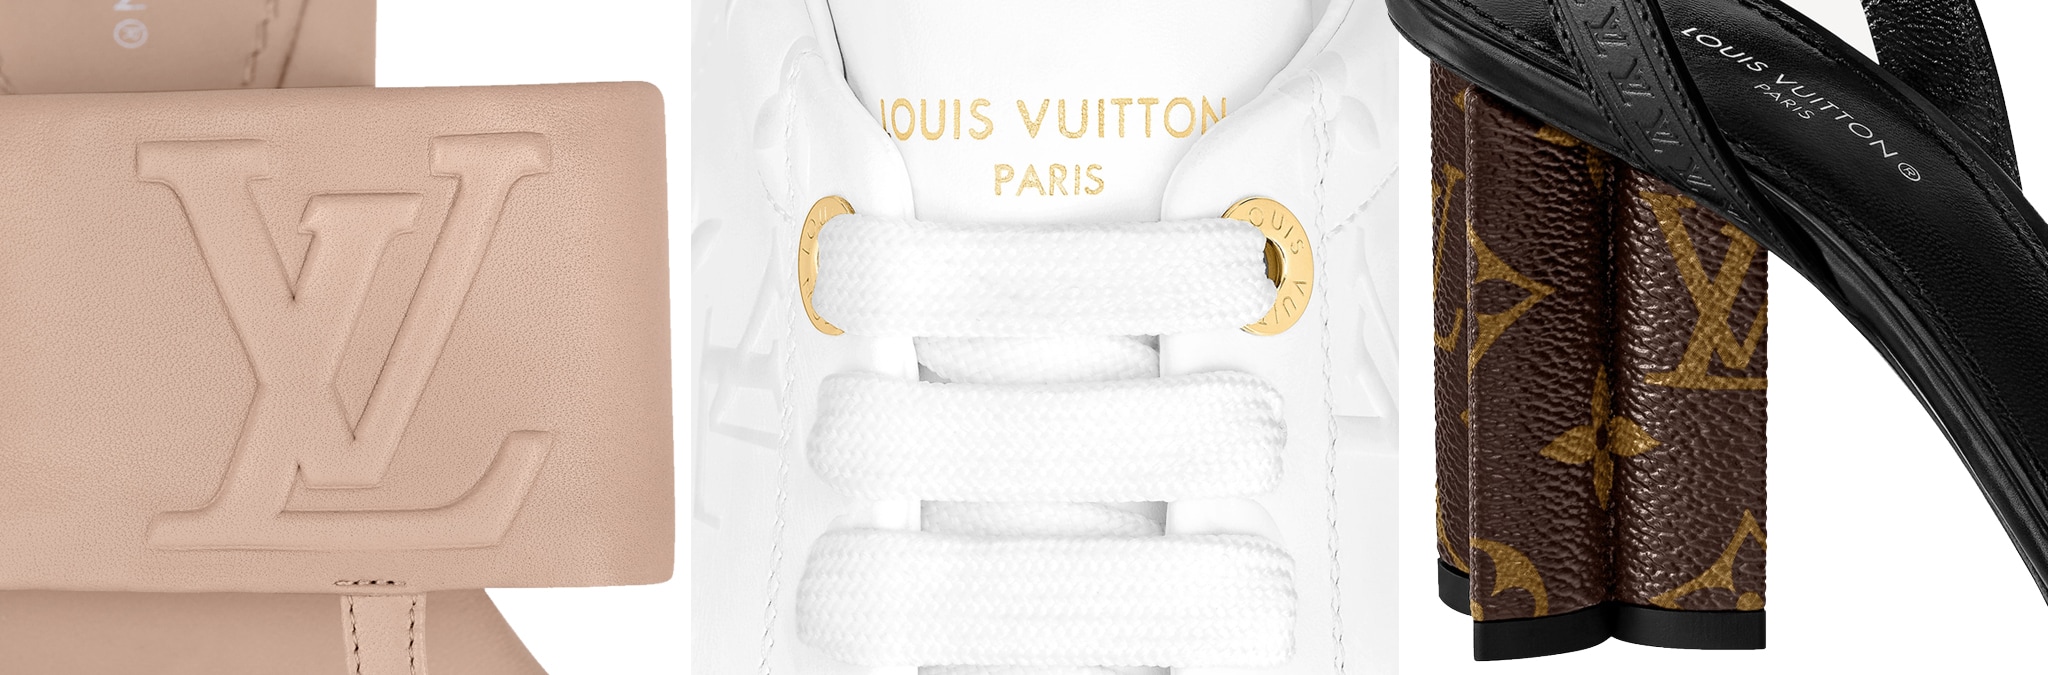 Fonts and logo prints on real Louis Vuitton shoes should be consistent